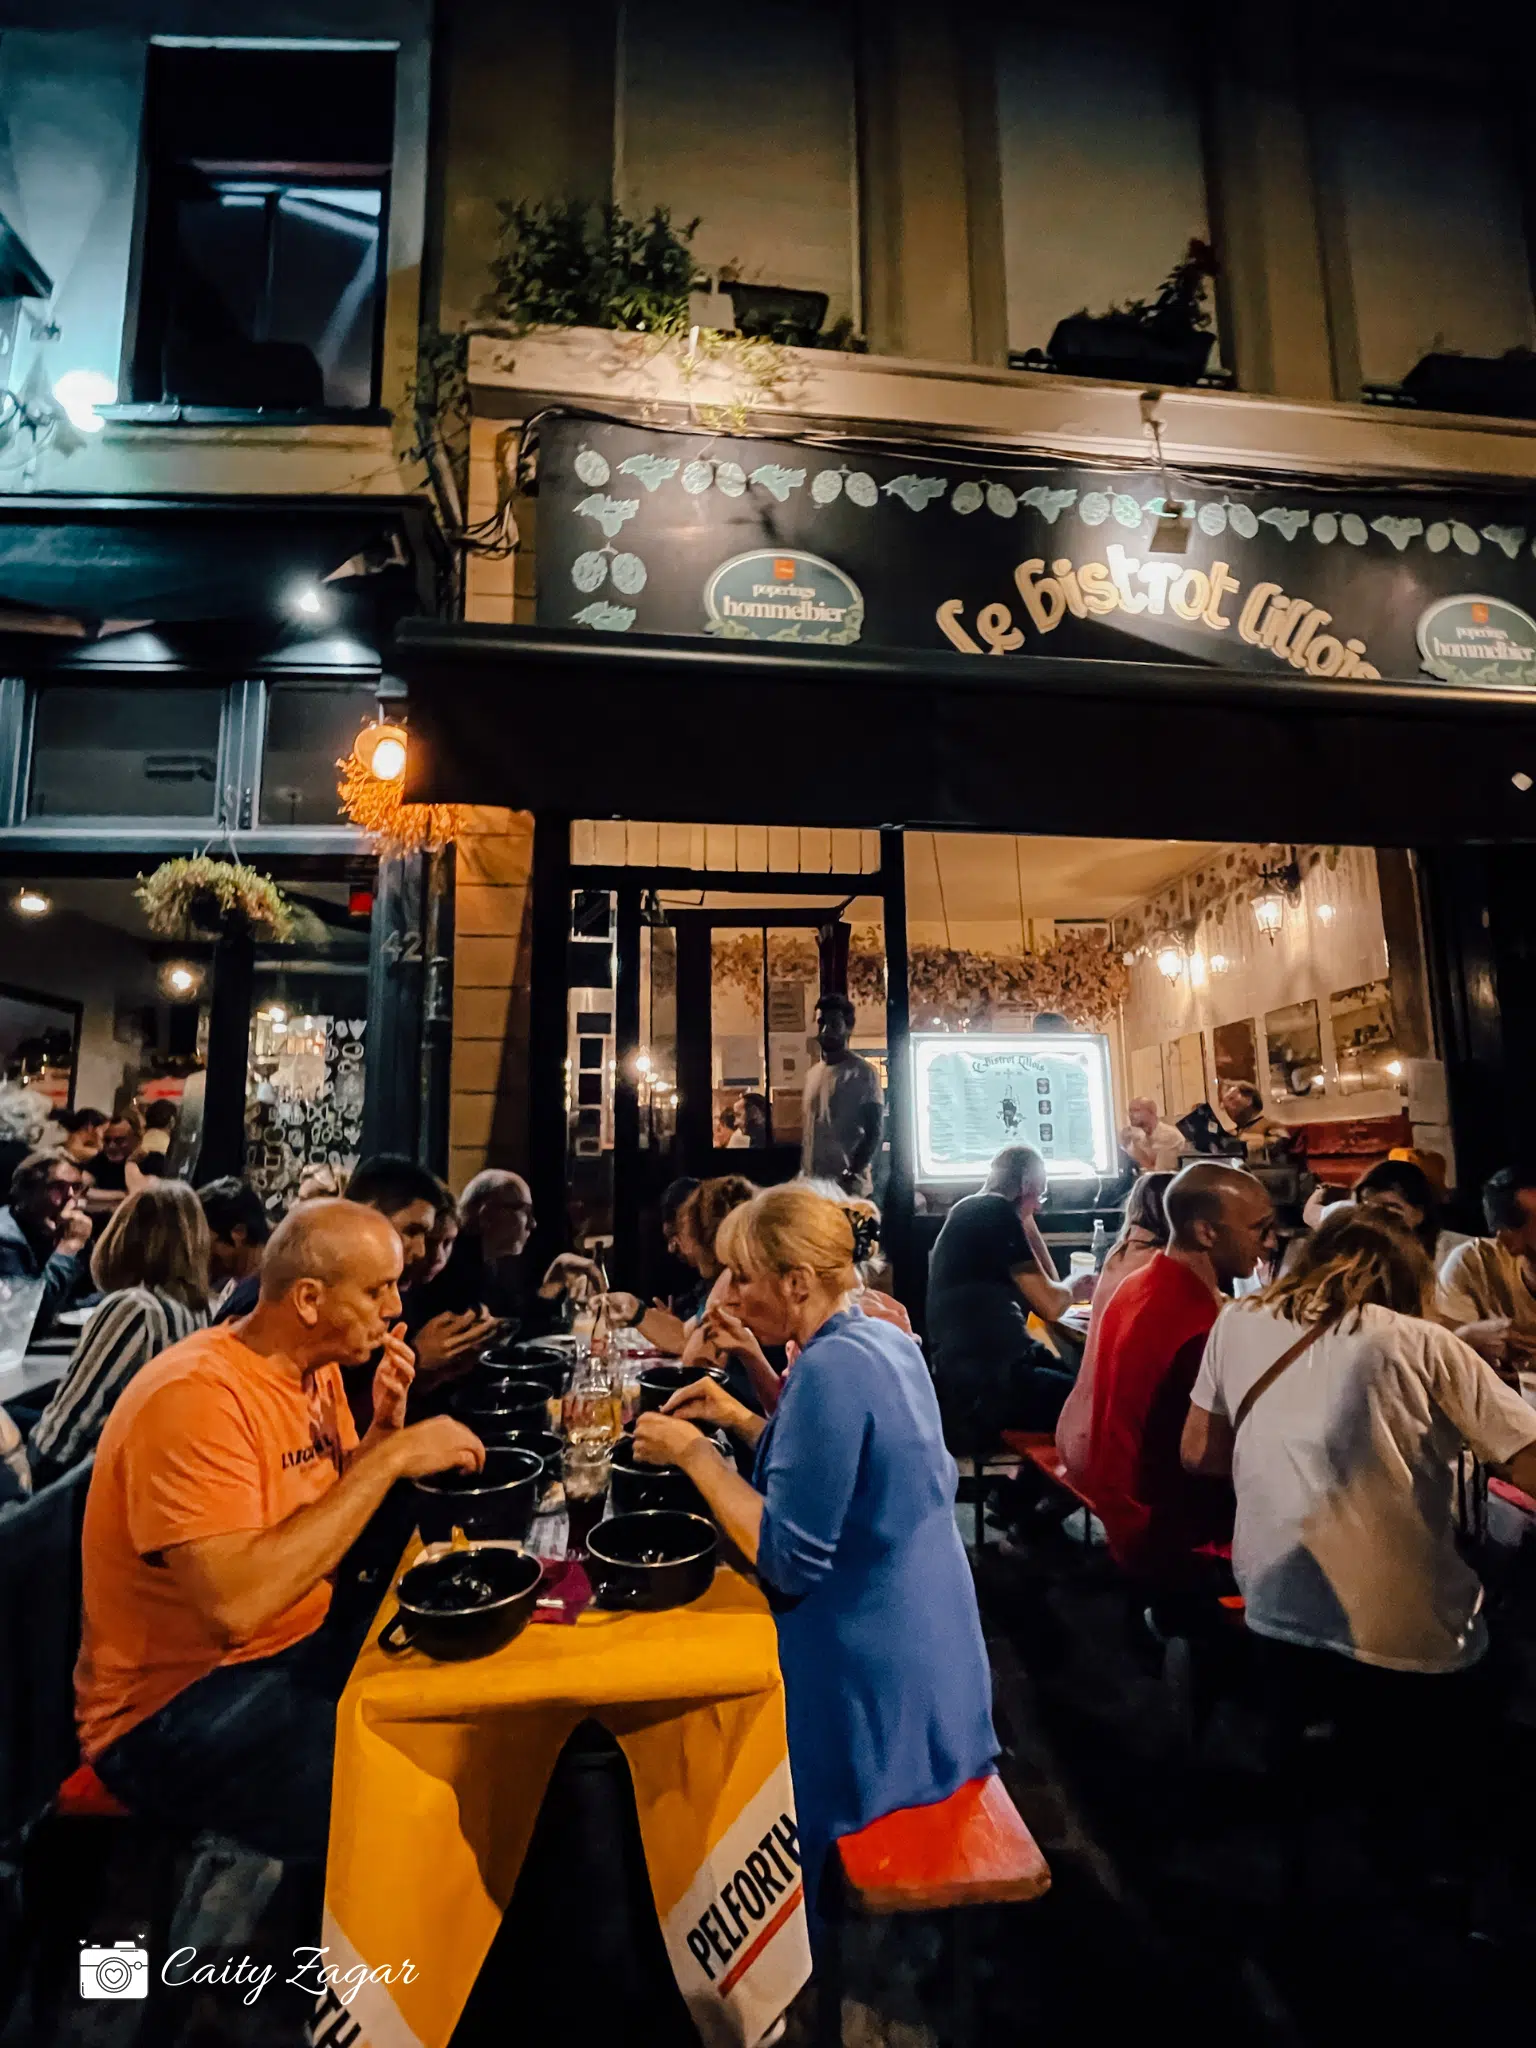 People enjoying their moules frites in the late night hours of Braderie